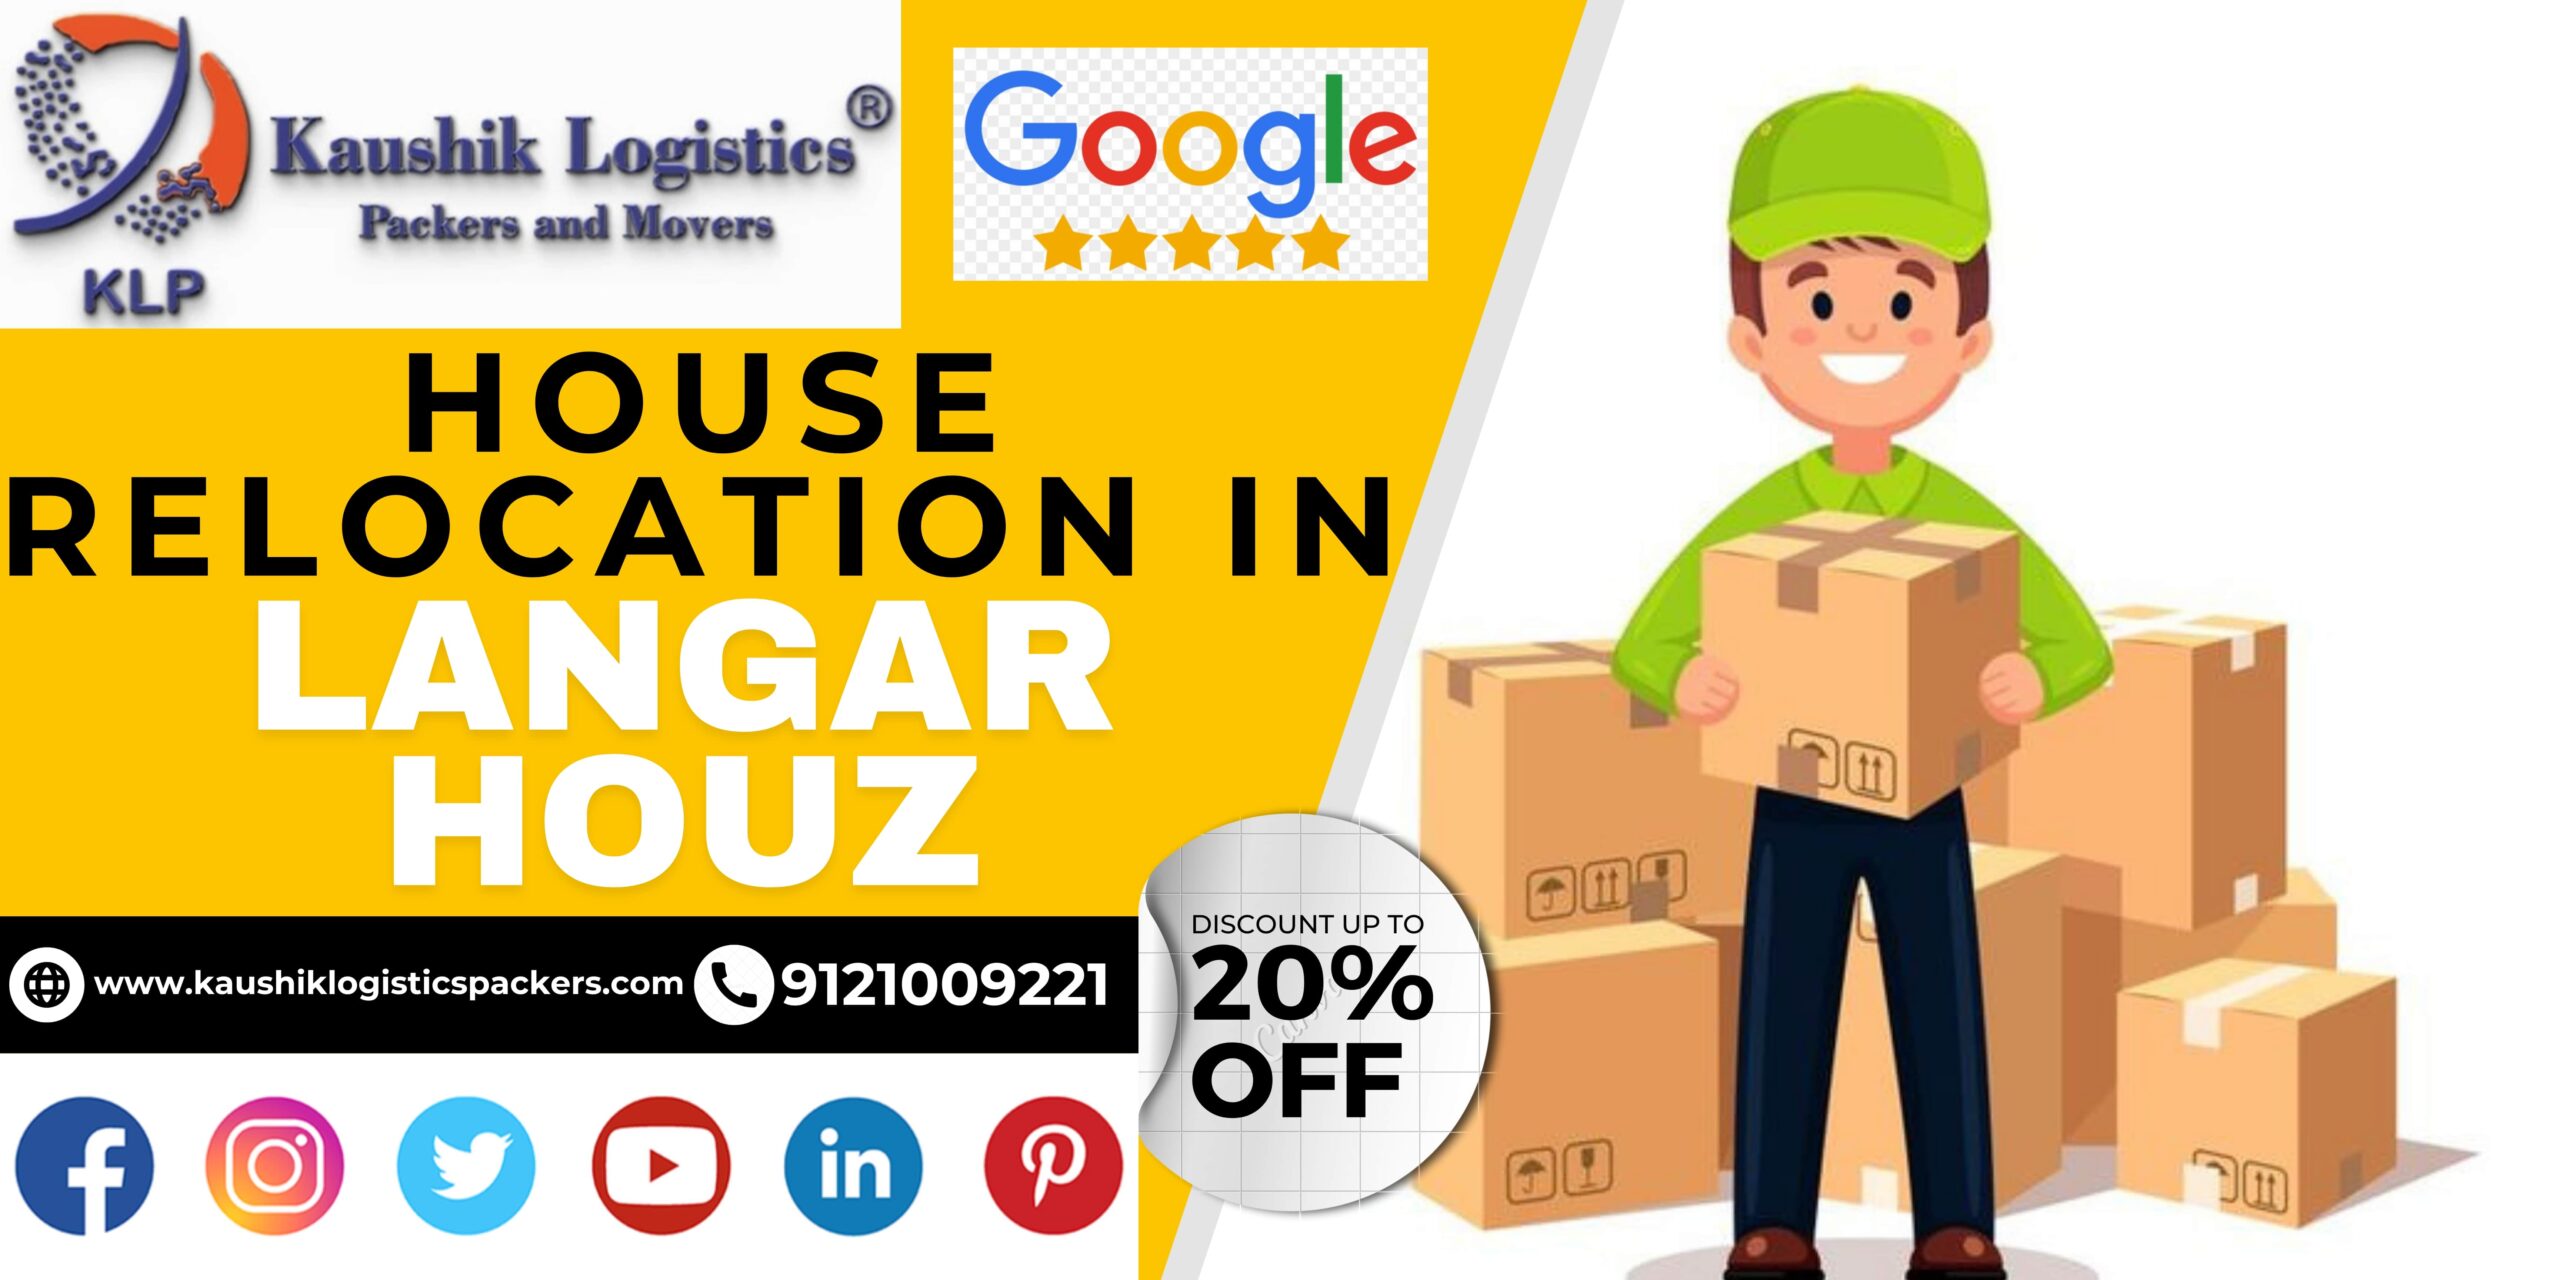 Packers and Movers In Langar Houz